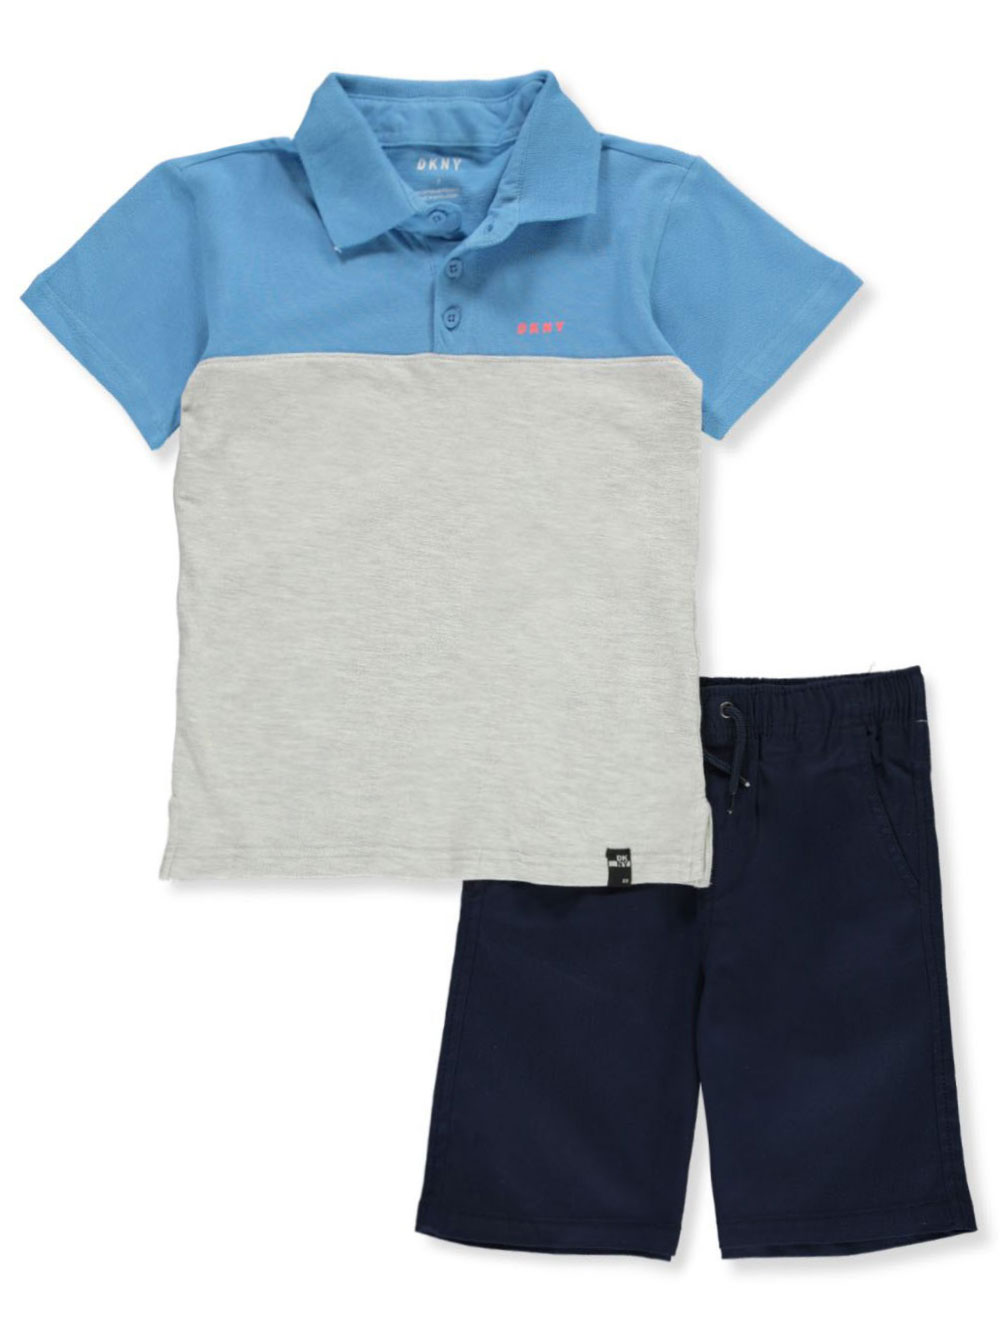 Size 3t Sets for Boys